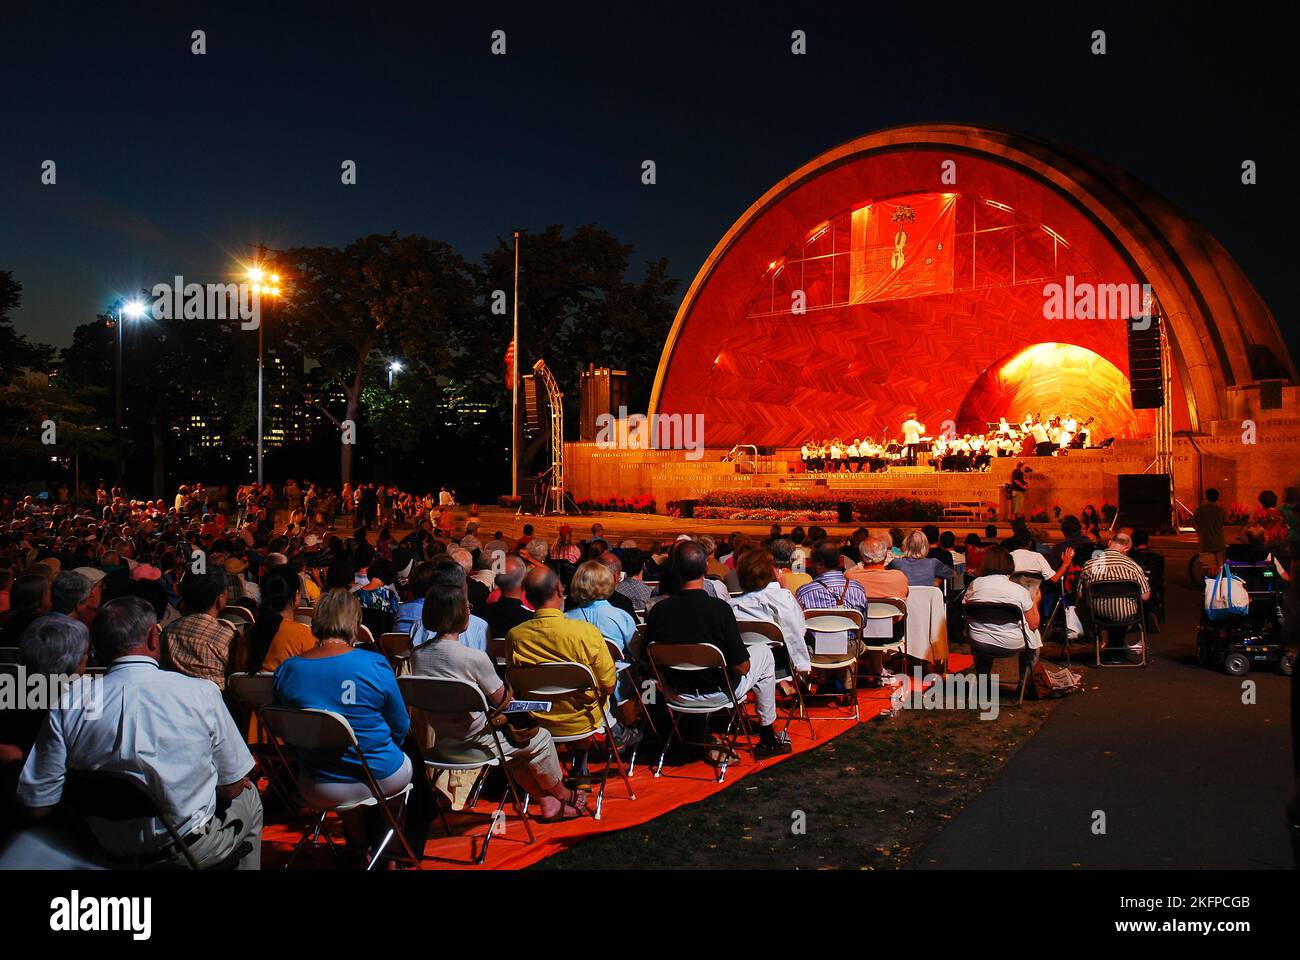 A  audience enjoys a concert by a symphony orchestra playing classical music at night in the illuminated Hatch Shell in Boston Stock Photo